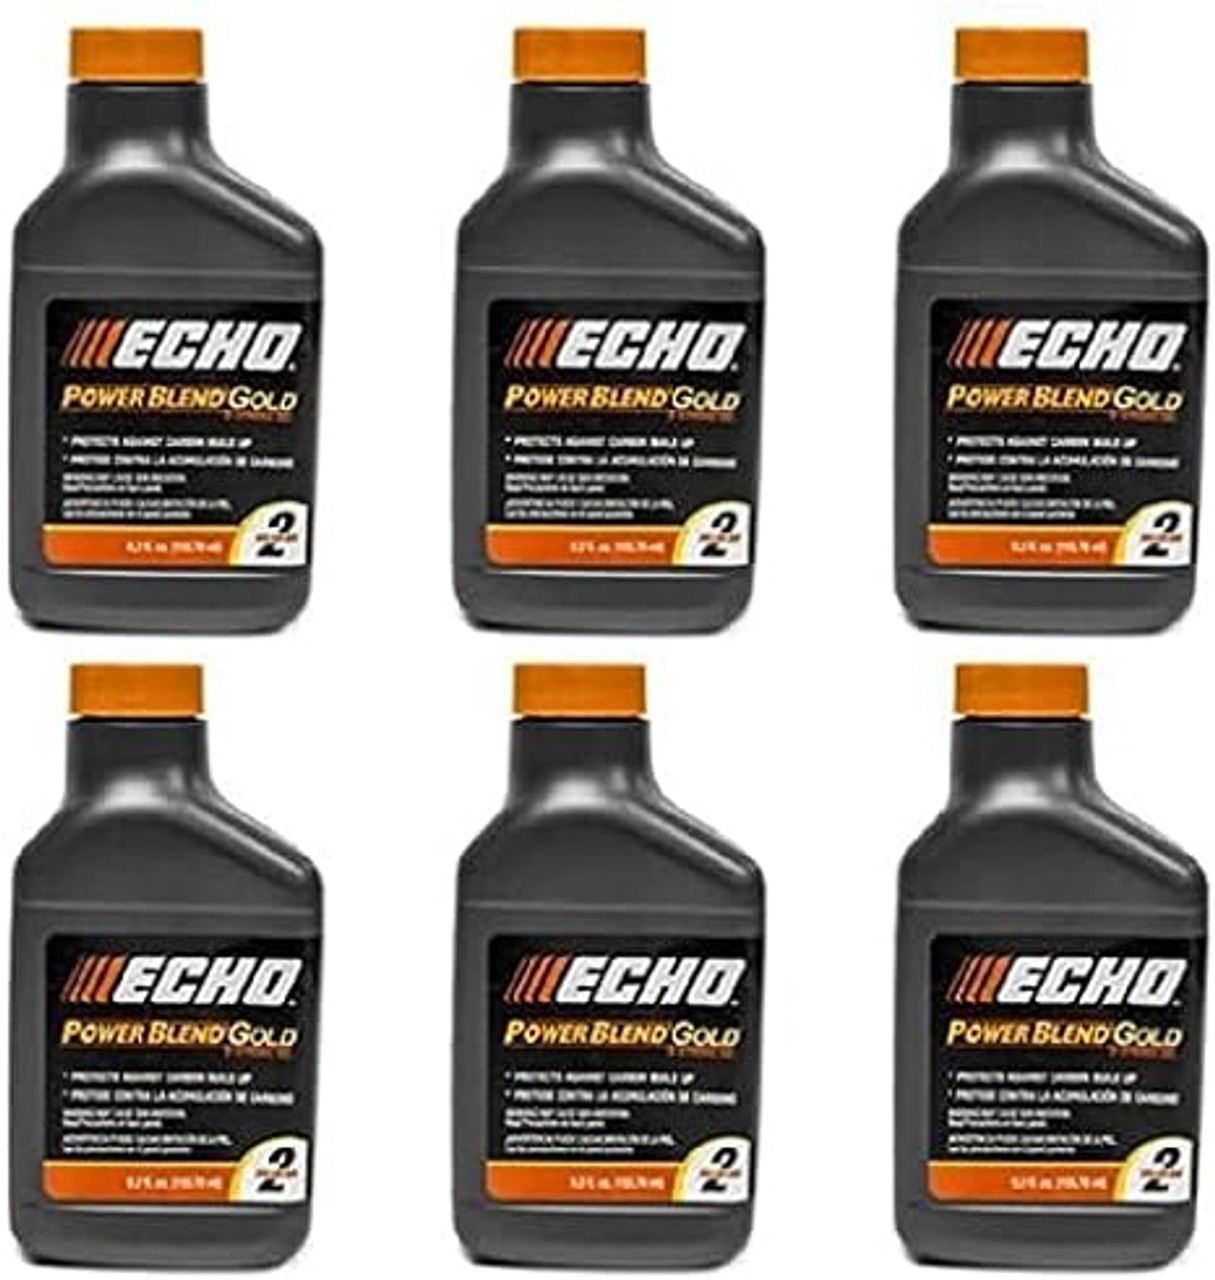 ECHO PowerBlend Gold 2-Cycle Oil 5.2 oz Bottle – Mix 1 Bottle to 2 Gal (6450002G)